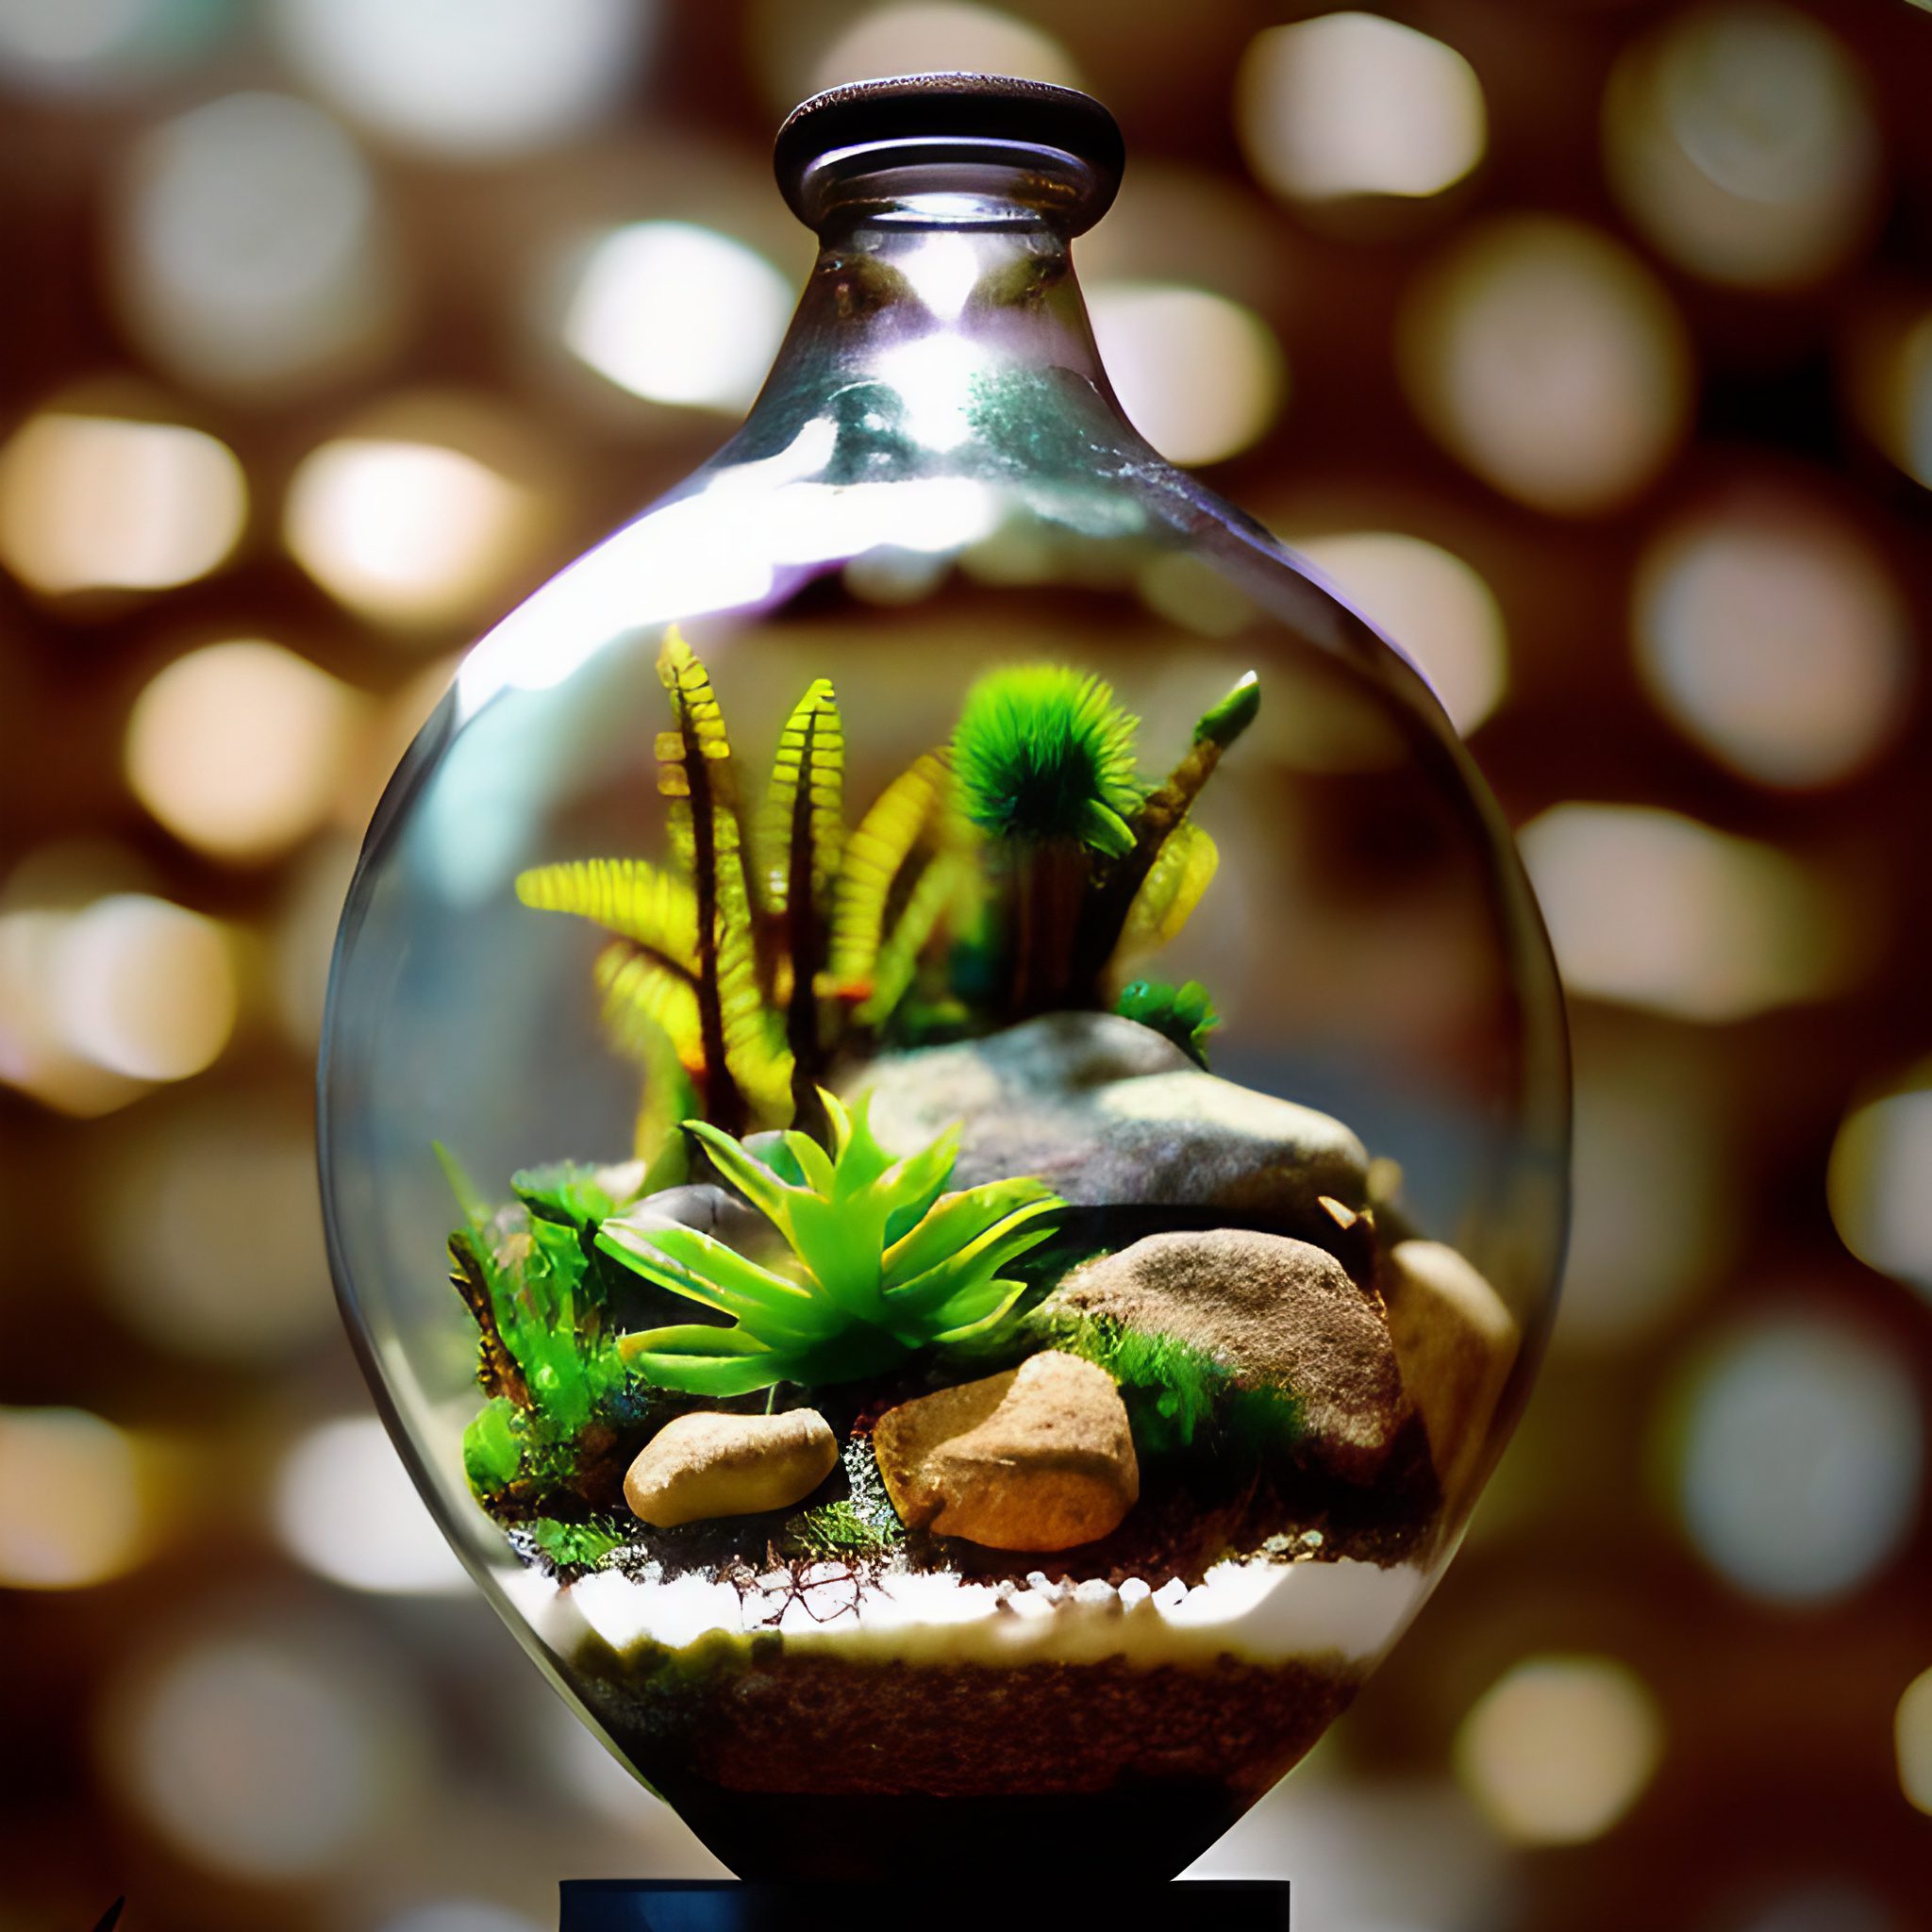 These 12 Terrarium Plants Will Look Adorable in Your Mini Garden  Best terrarium  plants, Terrarium plants, Closed terrarium plants